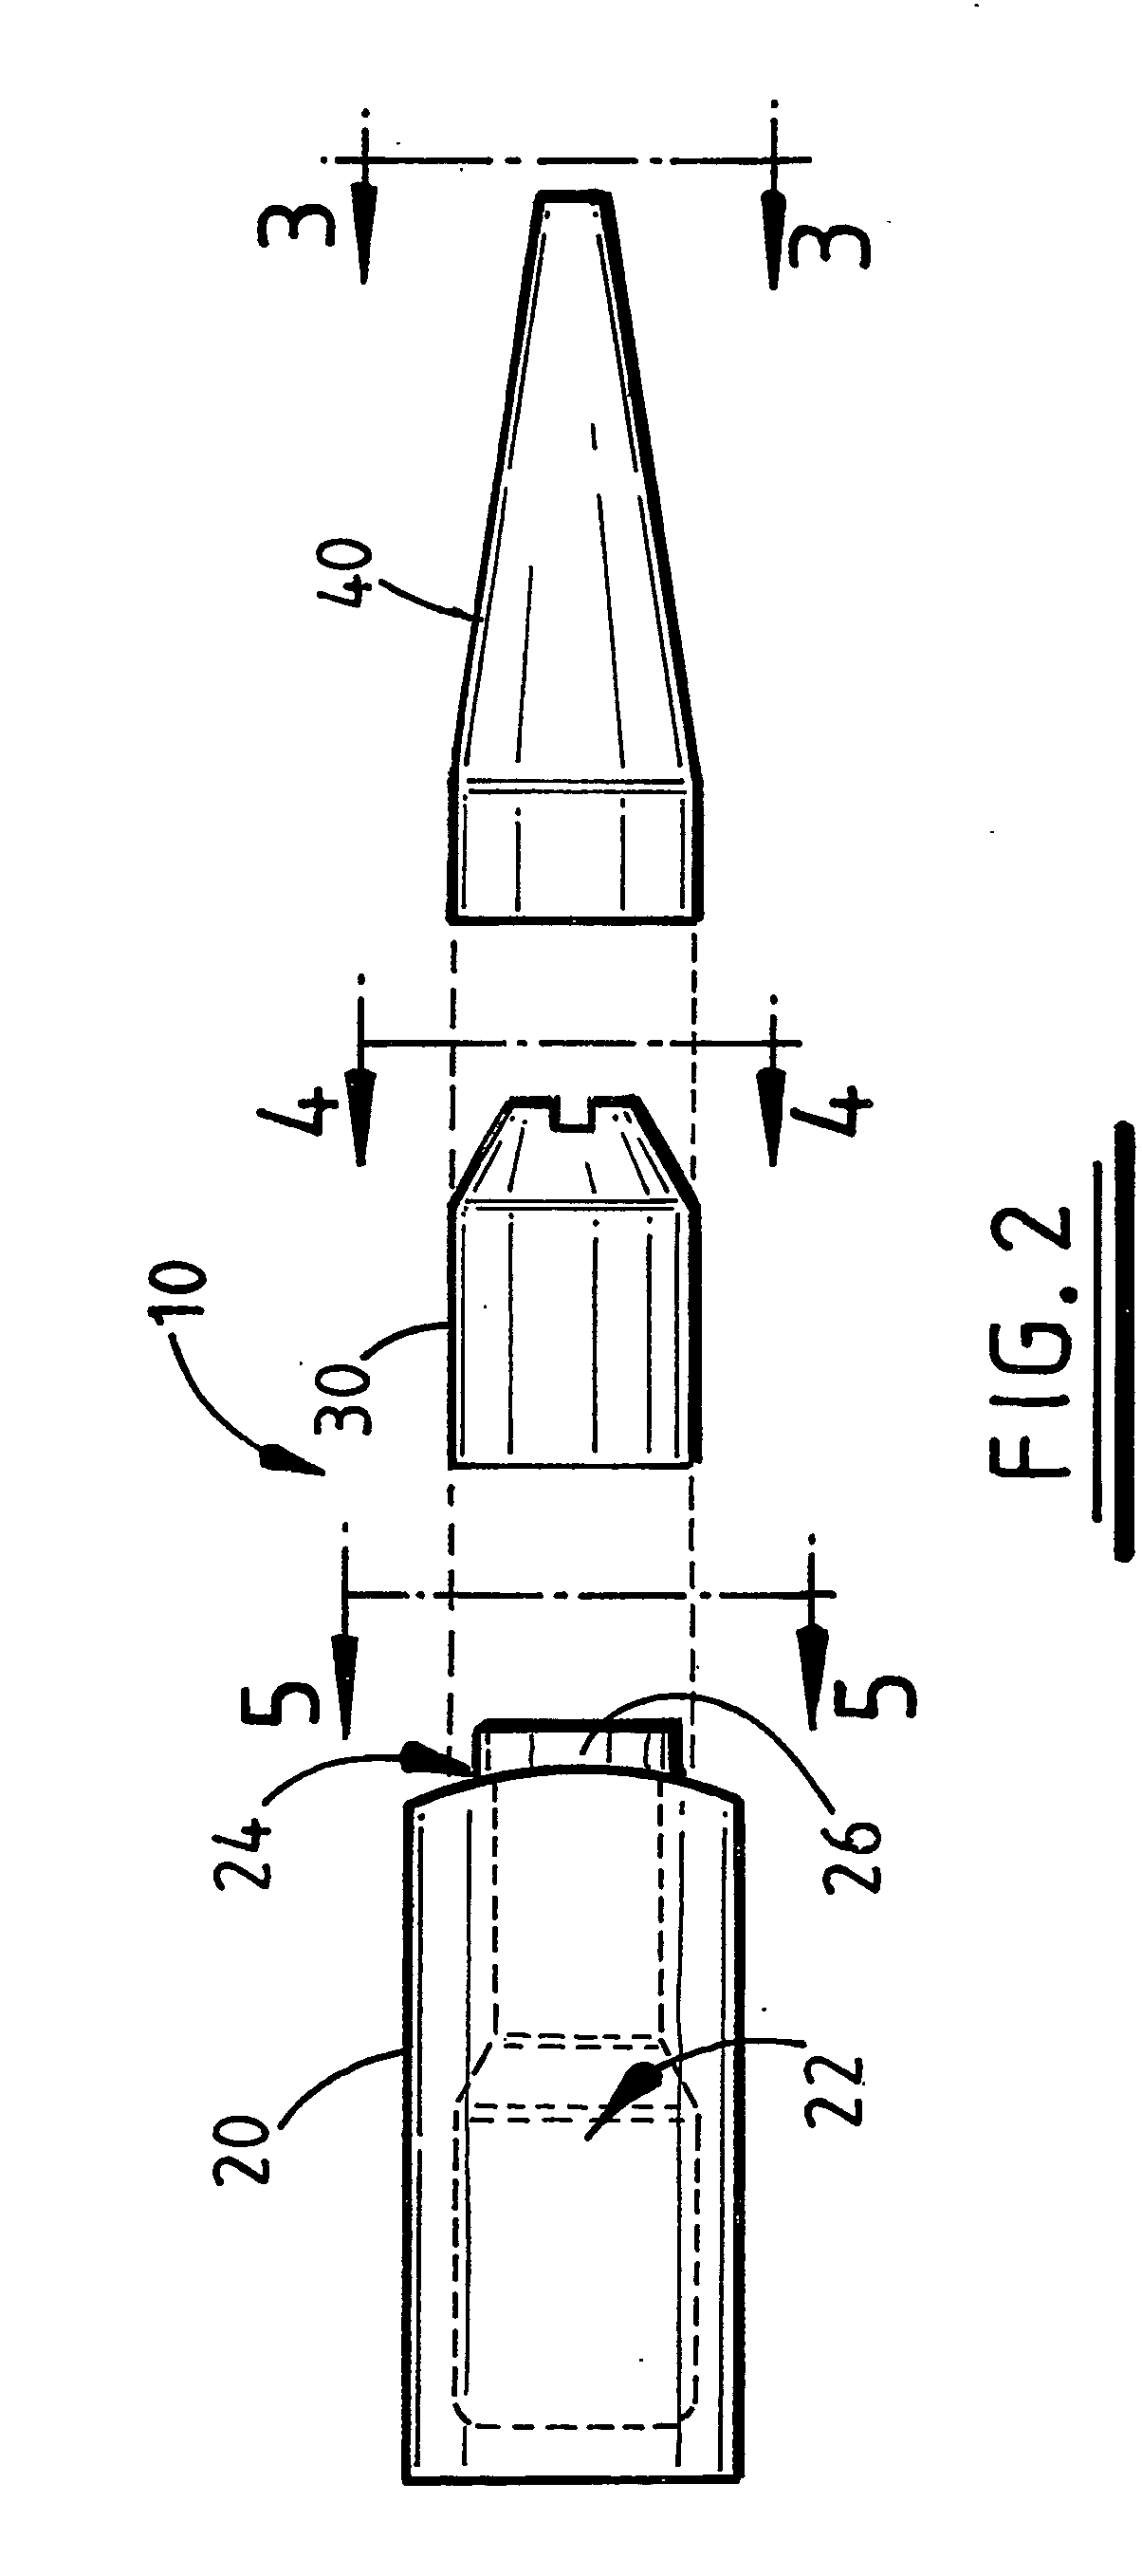 Applicator for tissue adhesive